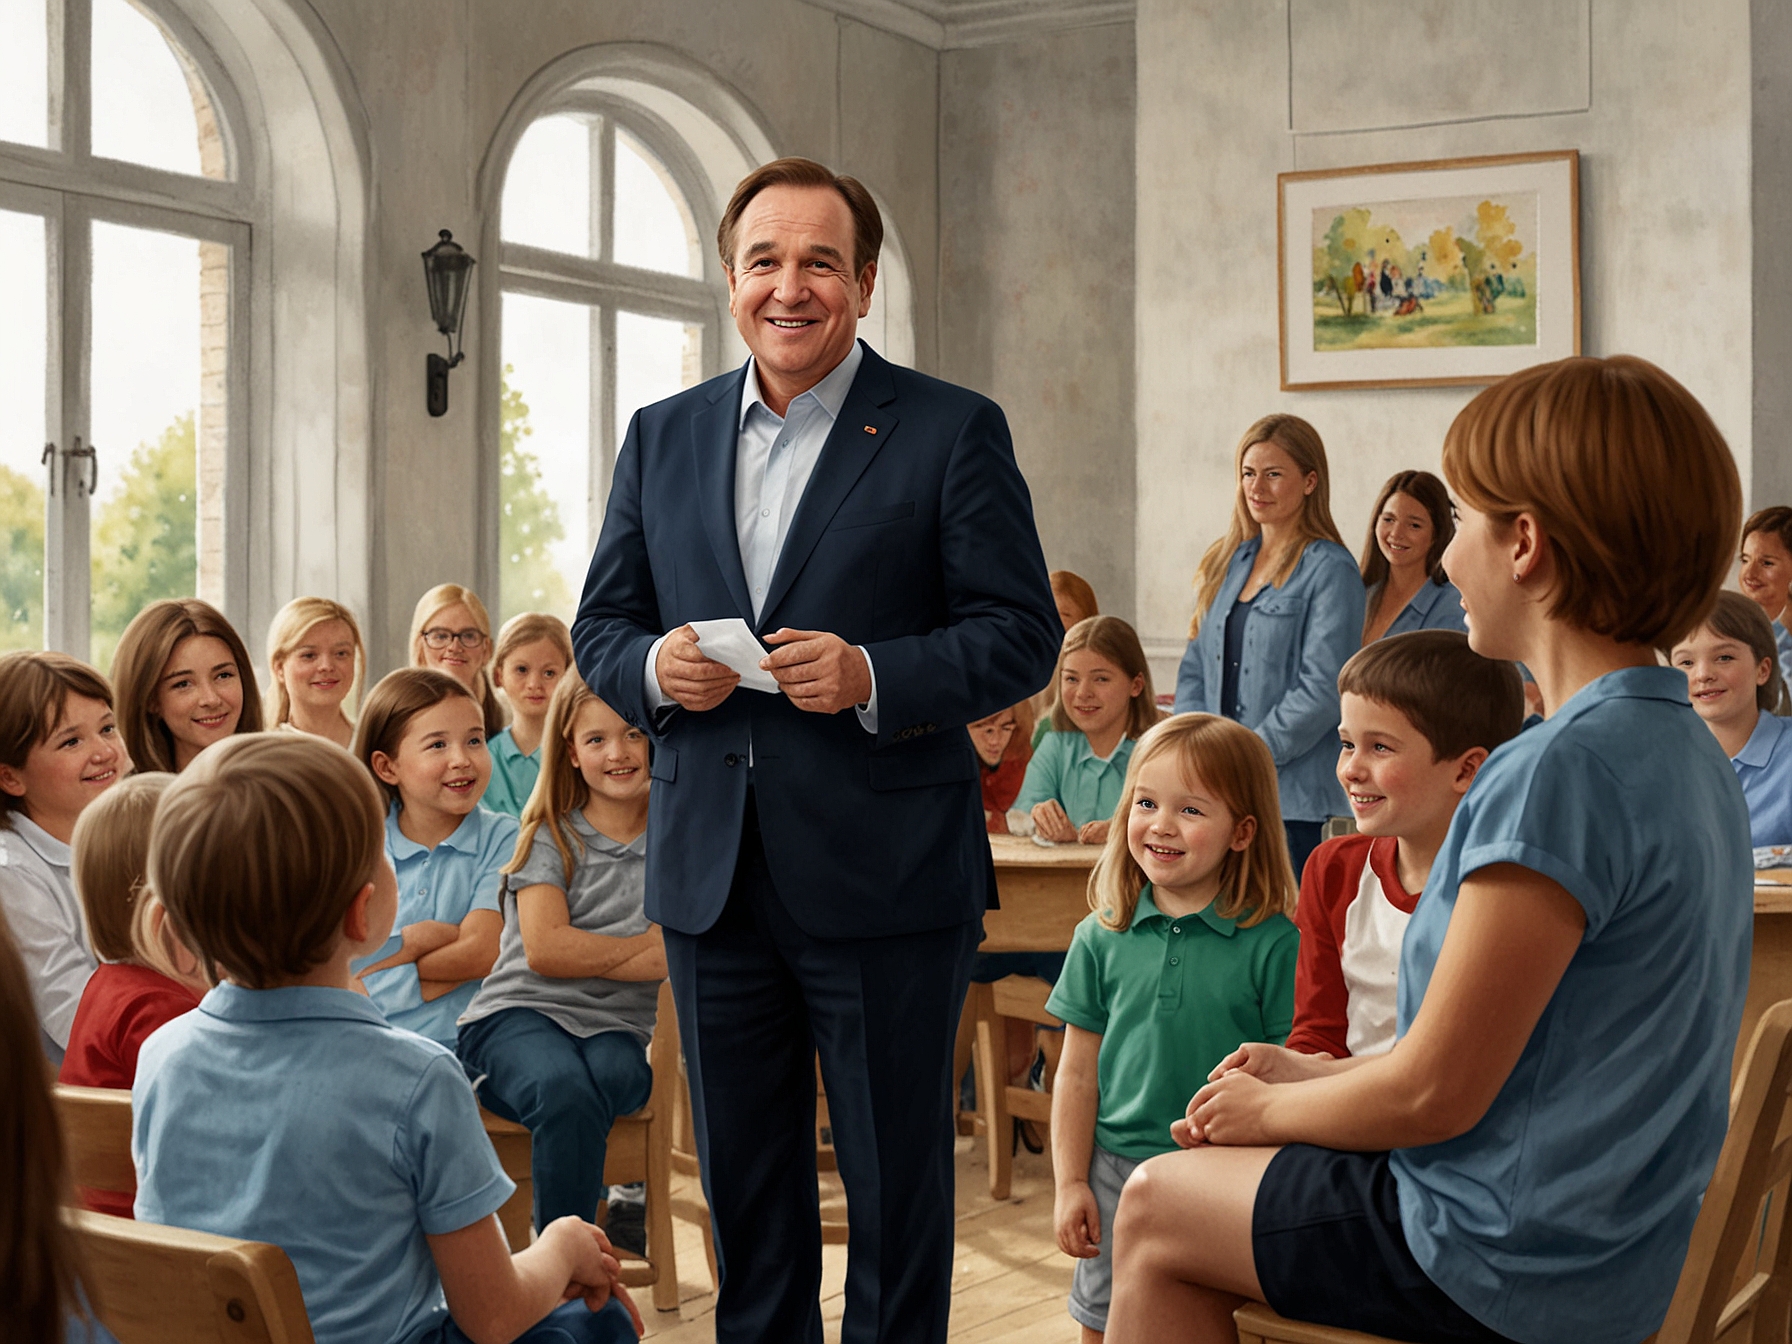 Prime Minister Stefan Löfven addressing the public about the new parental leave policy, highlighting the intergenerational benefits and support for family welfare in Sweden.